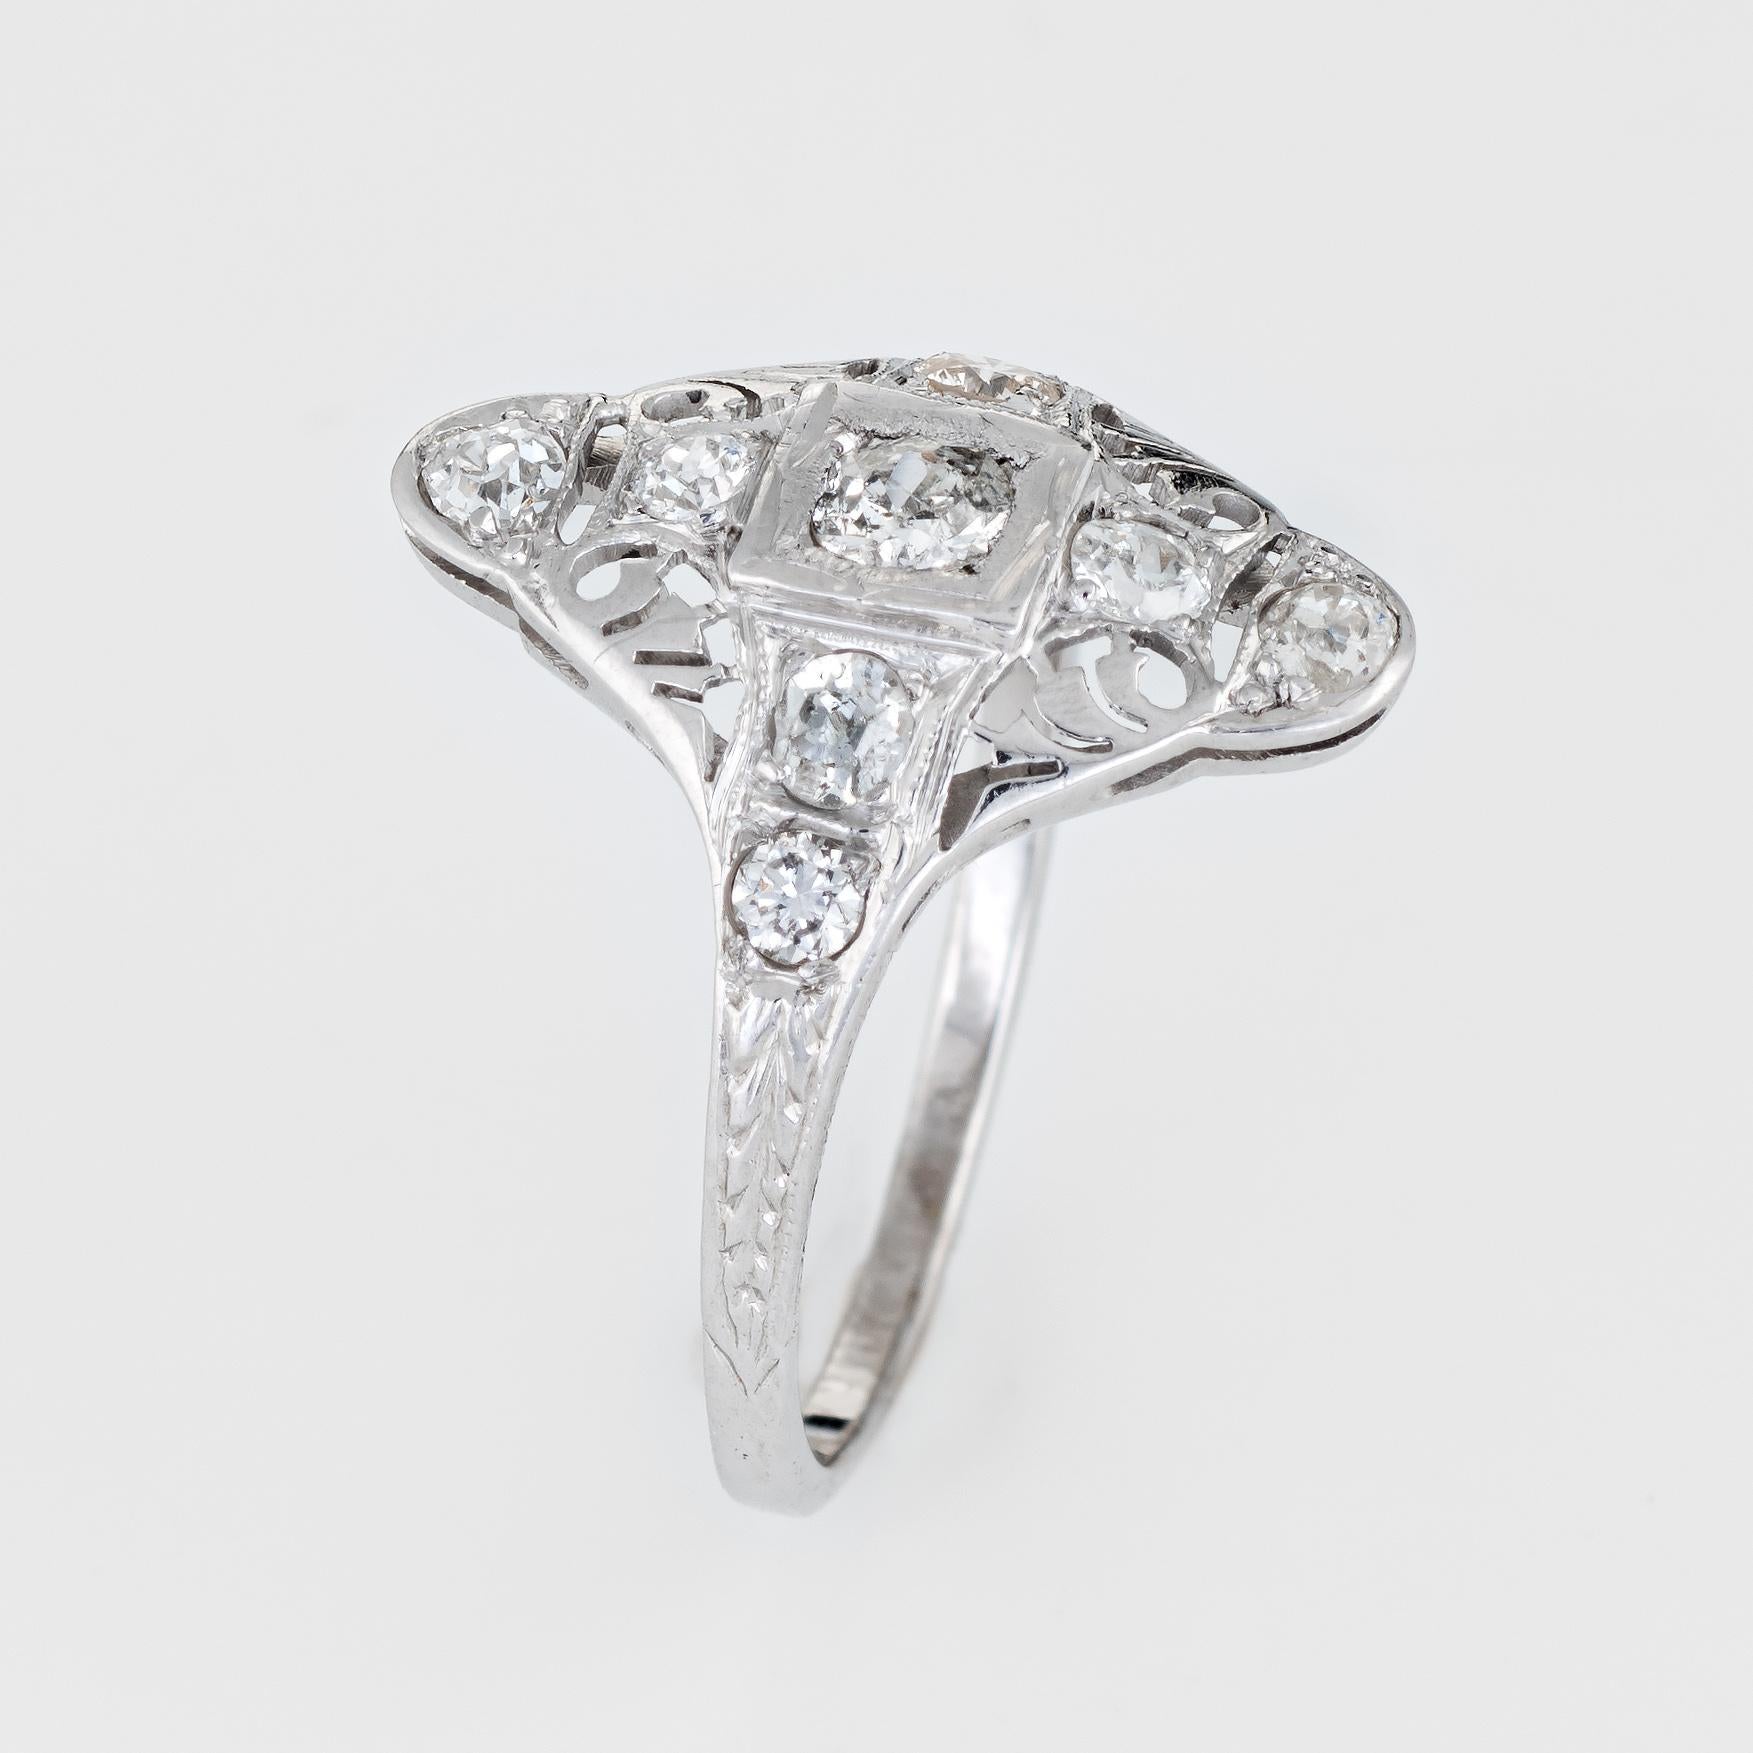 Finely detailed vintage Art Deco era ring (circa 1920s to 1930s) crafted in 18k white gold. 

Nine old mine cut diamonds total an estimated 0.60 carats (estimated at I-J color and SI2-I1 clarity). 

The ring features a lacy filigree design with an